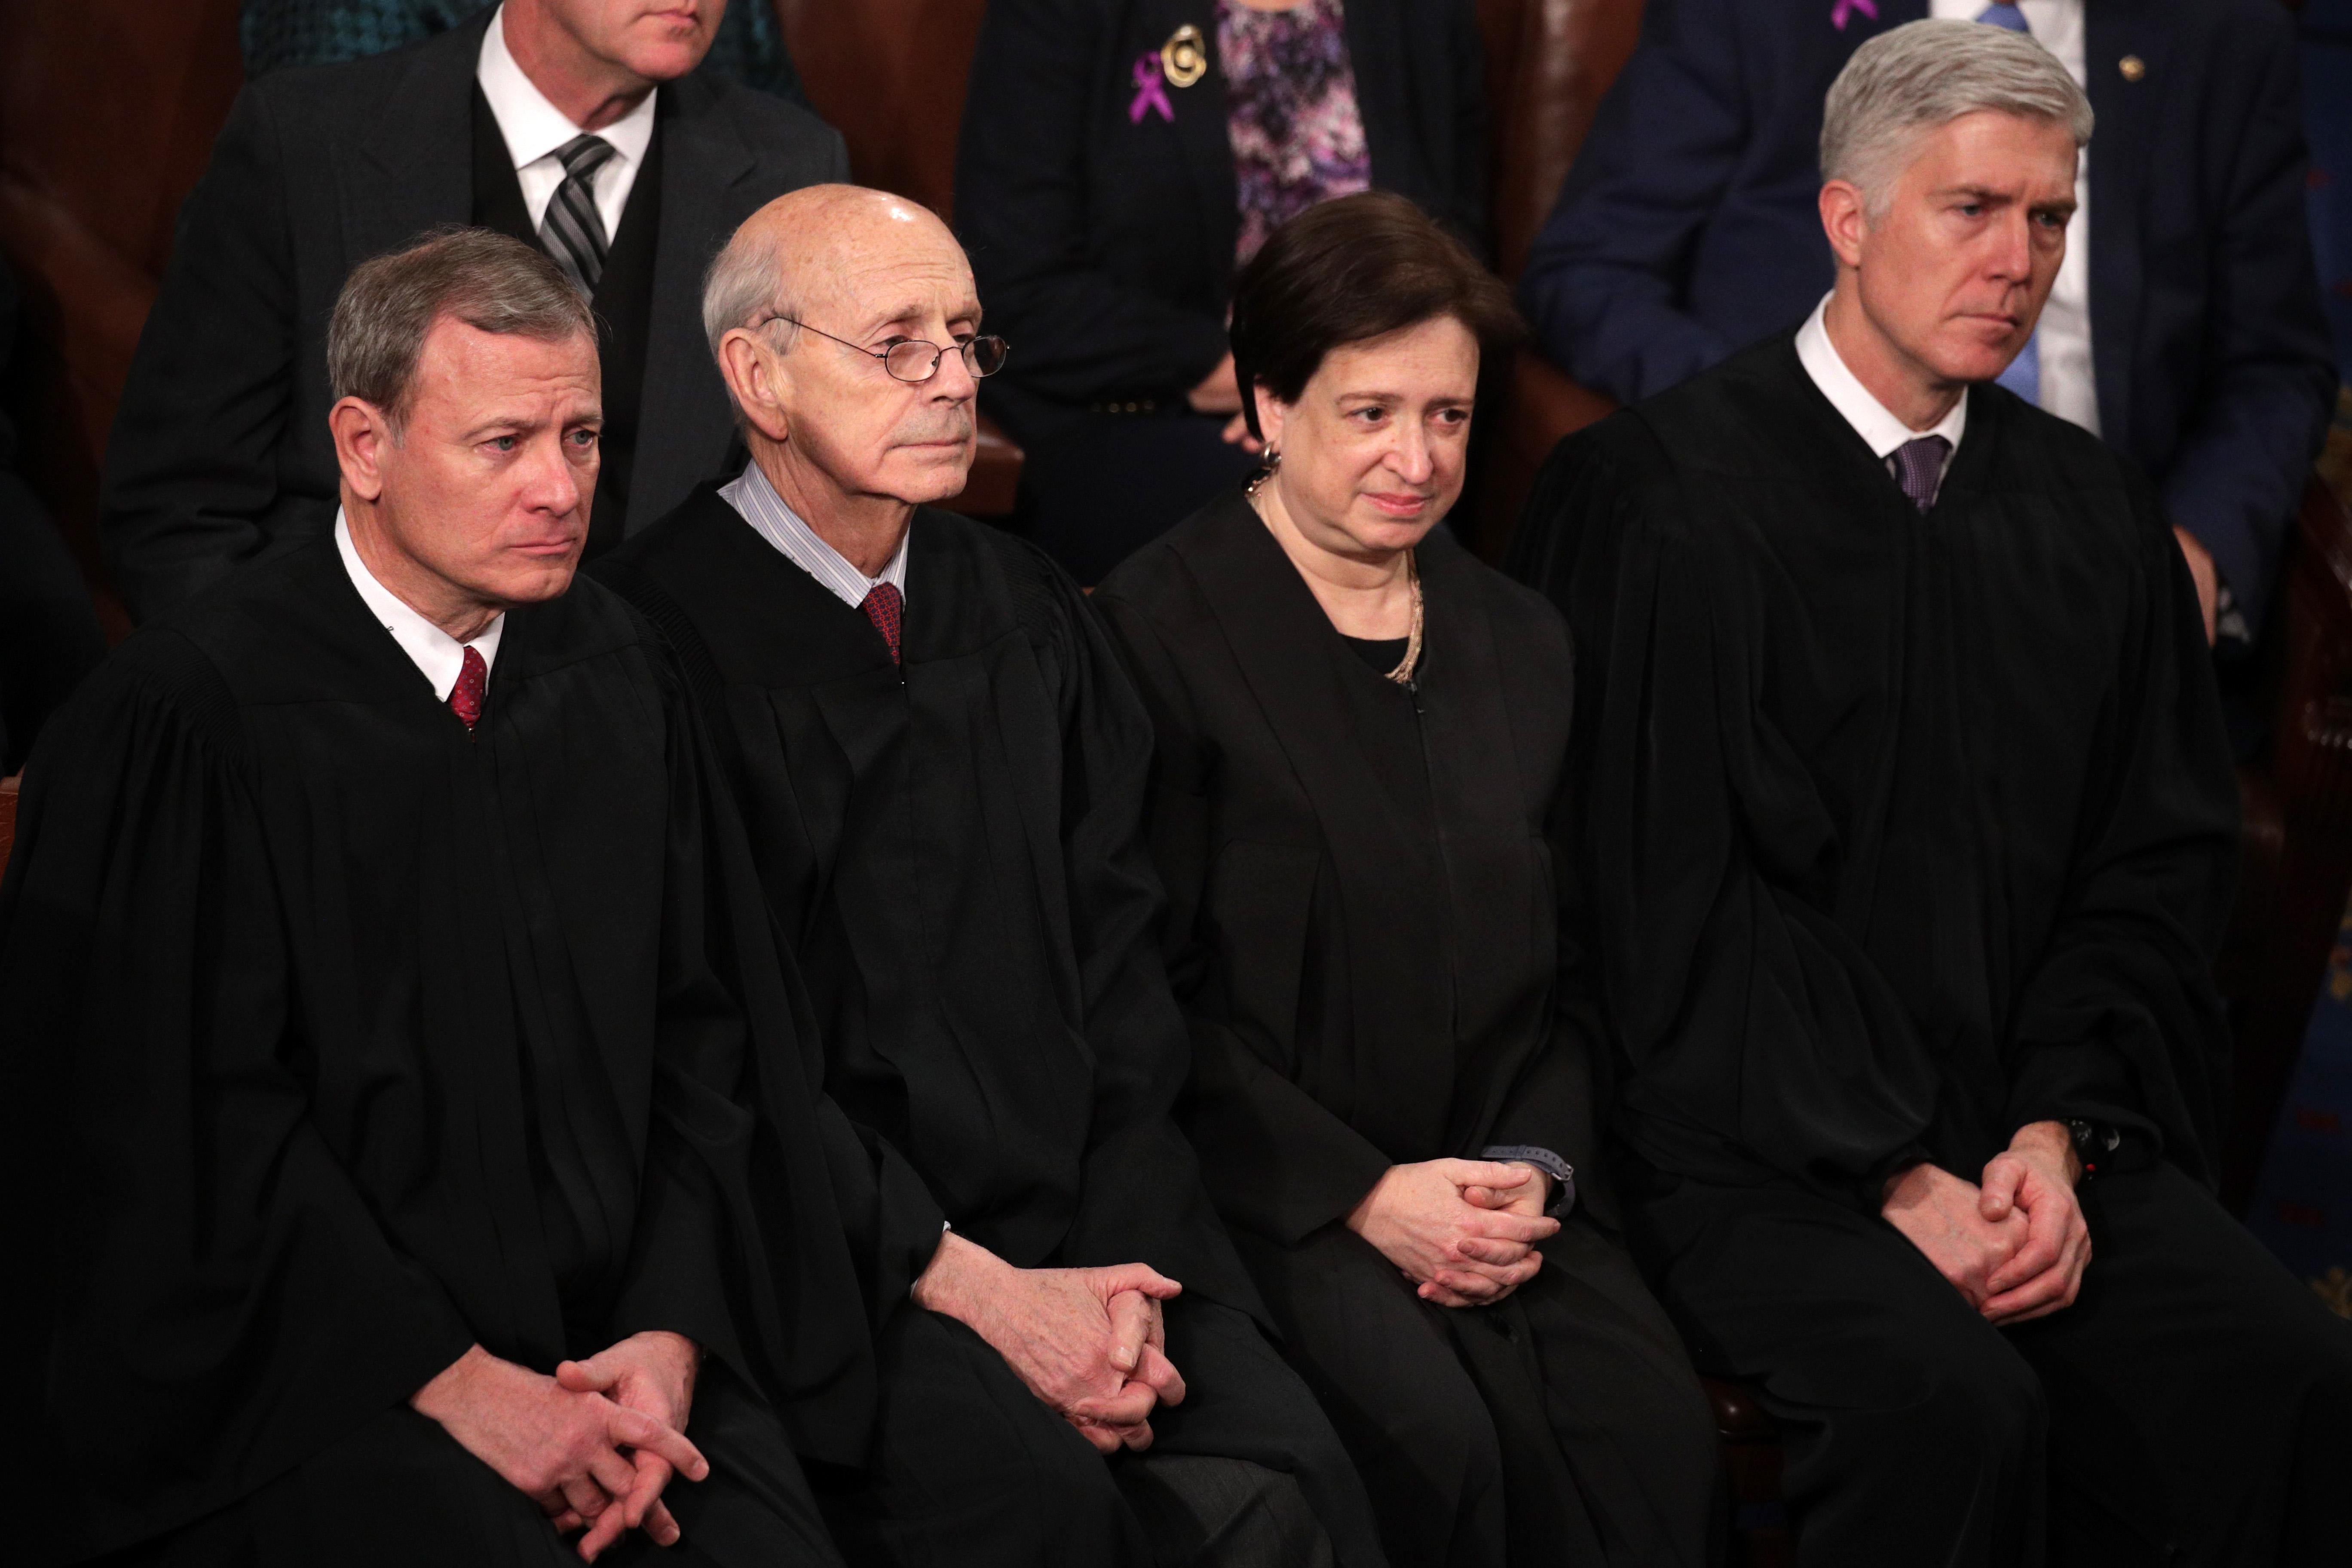 The four justices seated, wearing black robes.